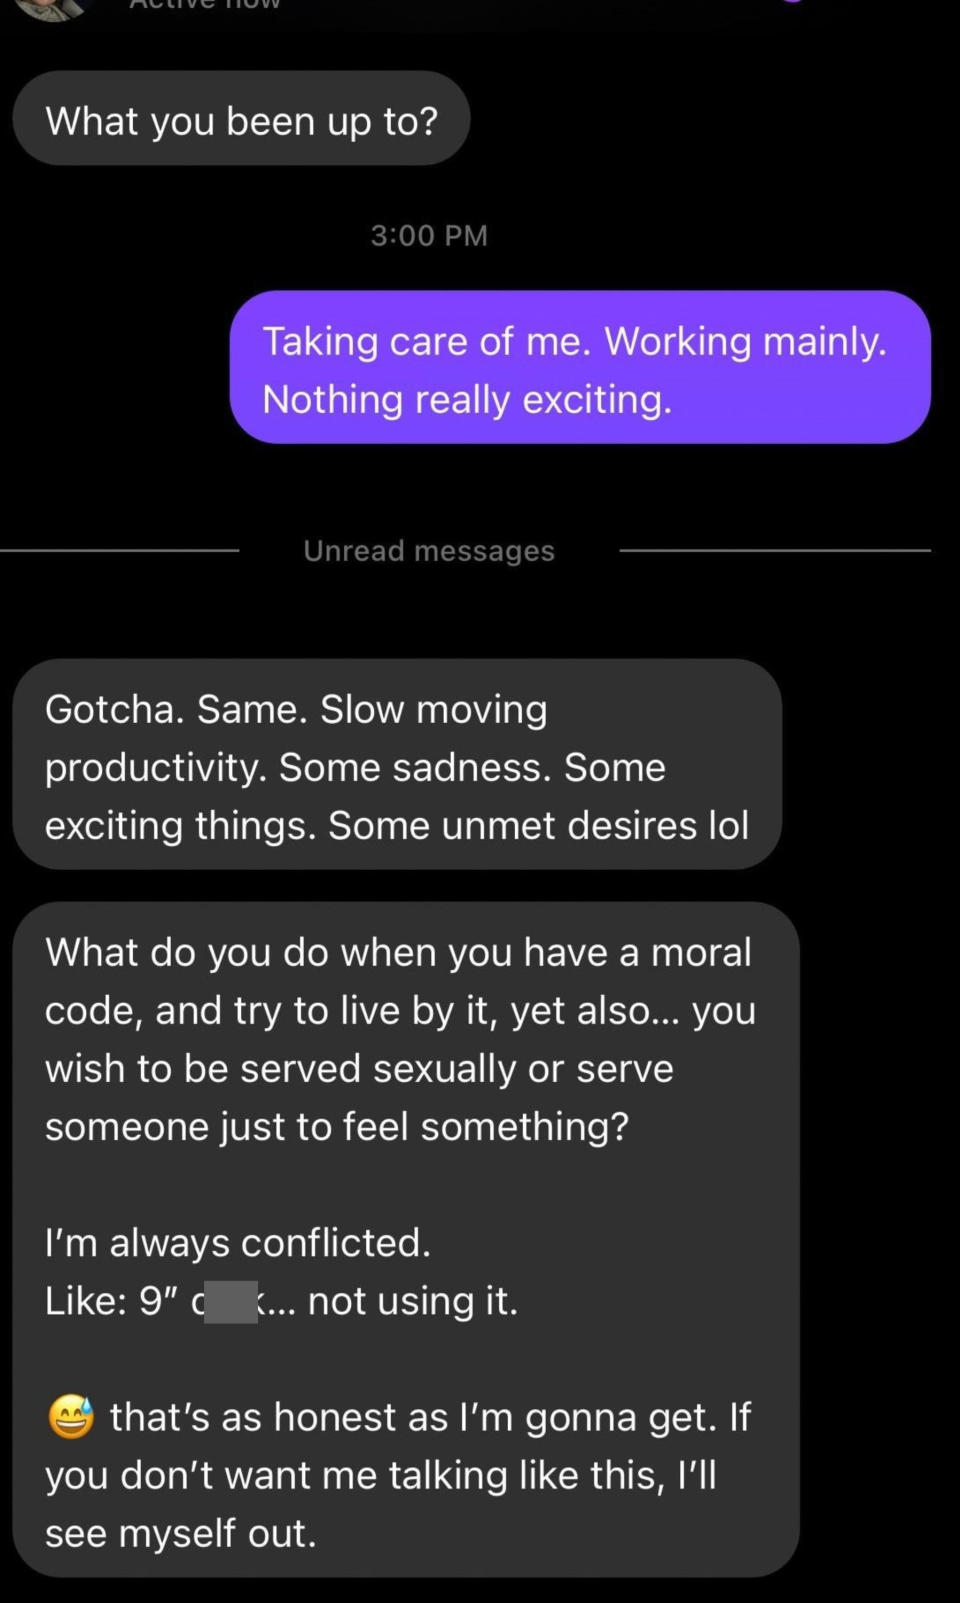 Person asks what they've been up to, they say "Taking care of me, working," and person says, "Gotcha, same," then asks what do you do when you want to live by a moral code but want to be served/serve sexually, then refer to their unused 9-inch cock